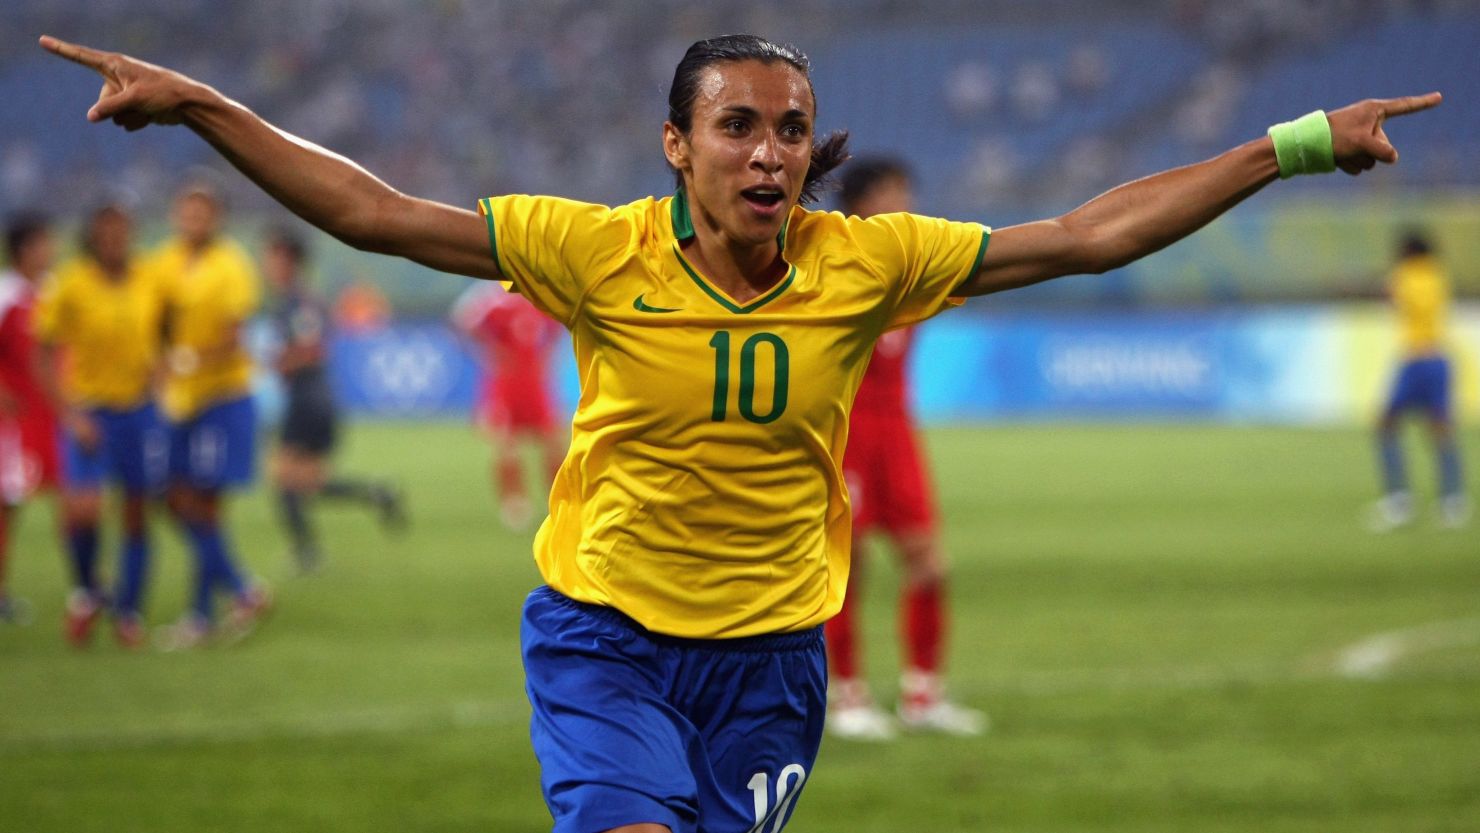 Marta is one of the players who wants the tournament played on grass.